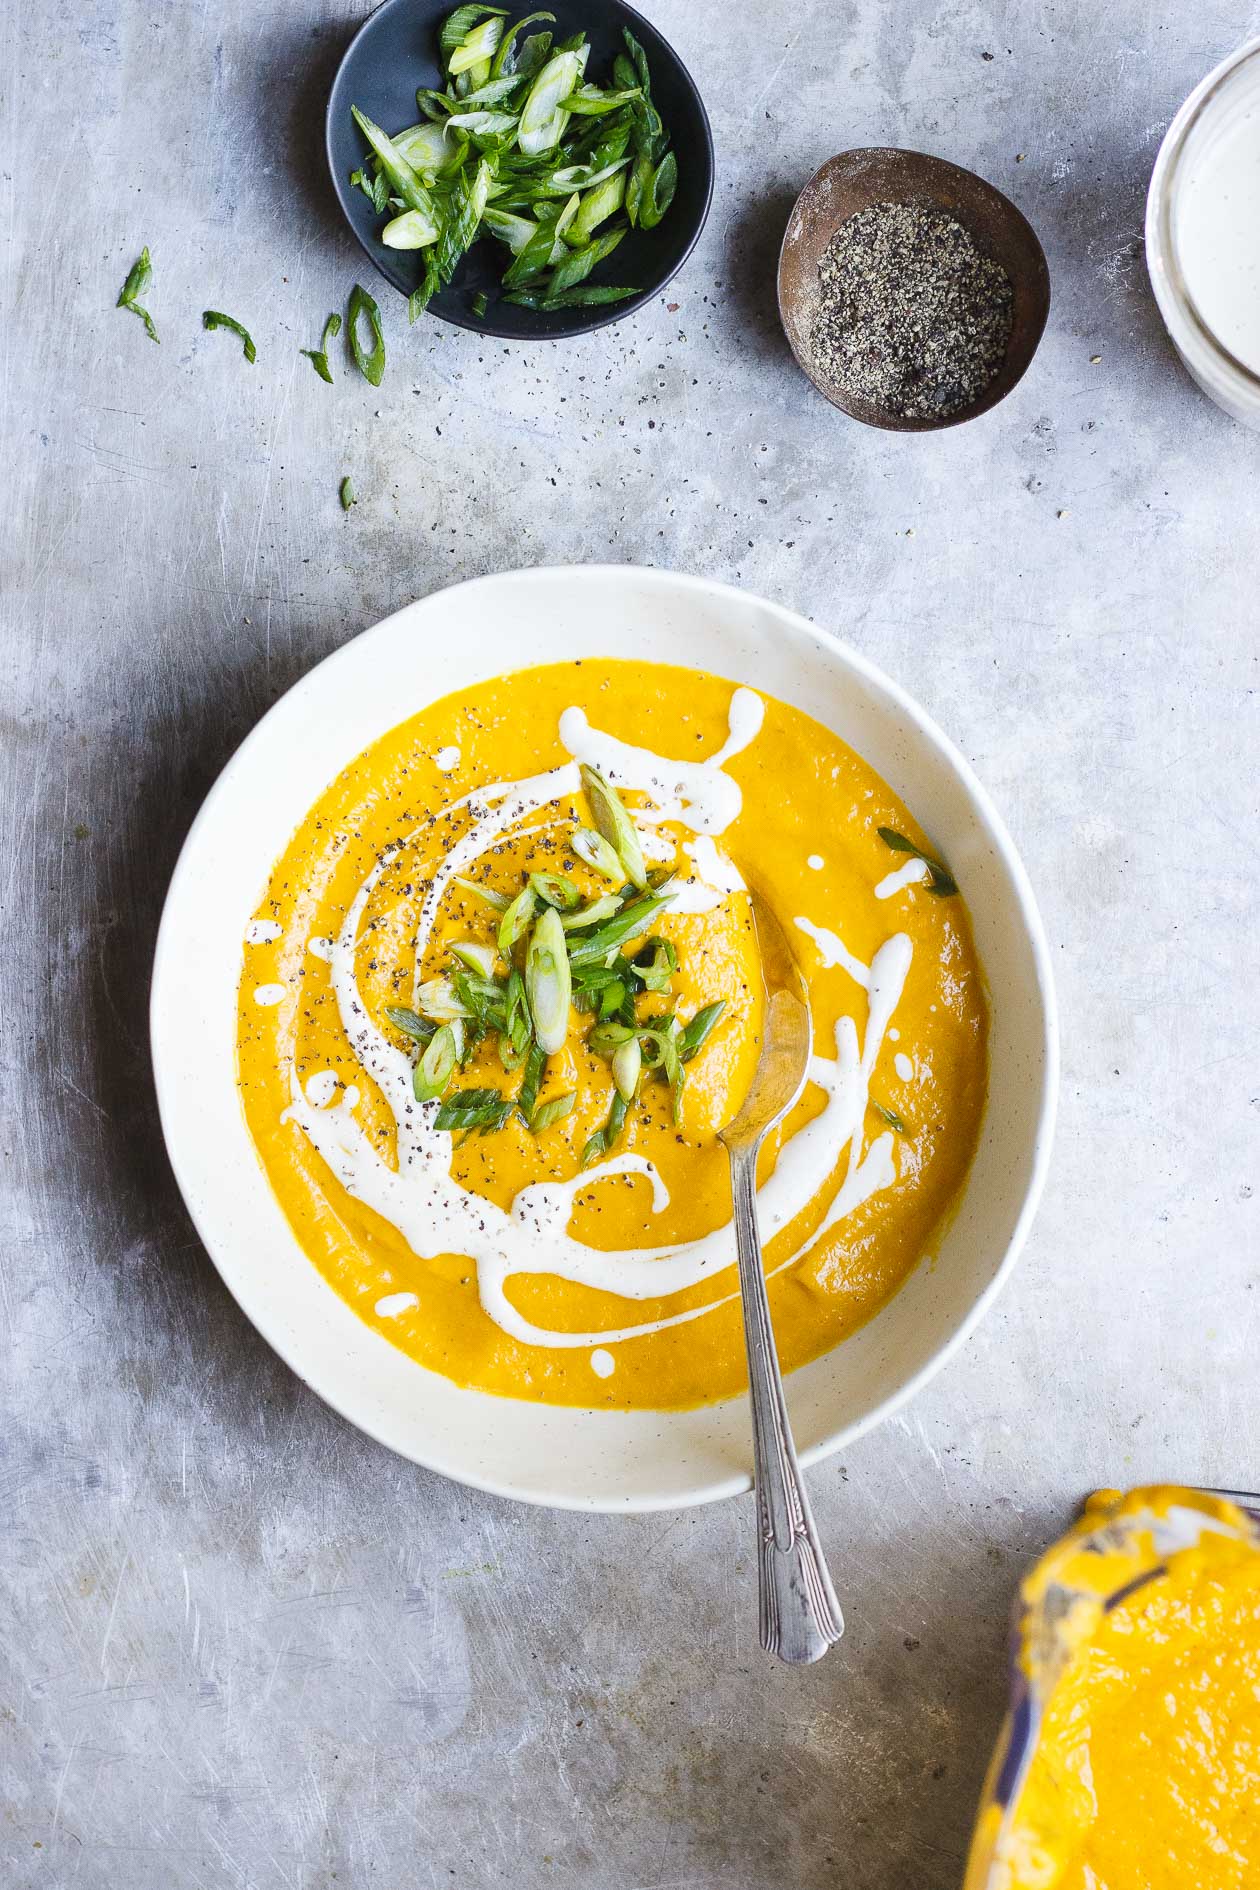 Caramelized Golden Beet Soup with Fall Roots + Garlicky Yogurt | Roasted and deeply caramelized golden beet soup with fall root vegetables and garlicky yogurt or cashew sauce to keep it vegan.